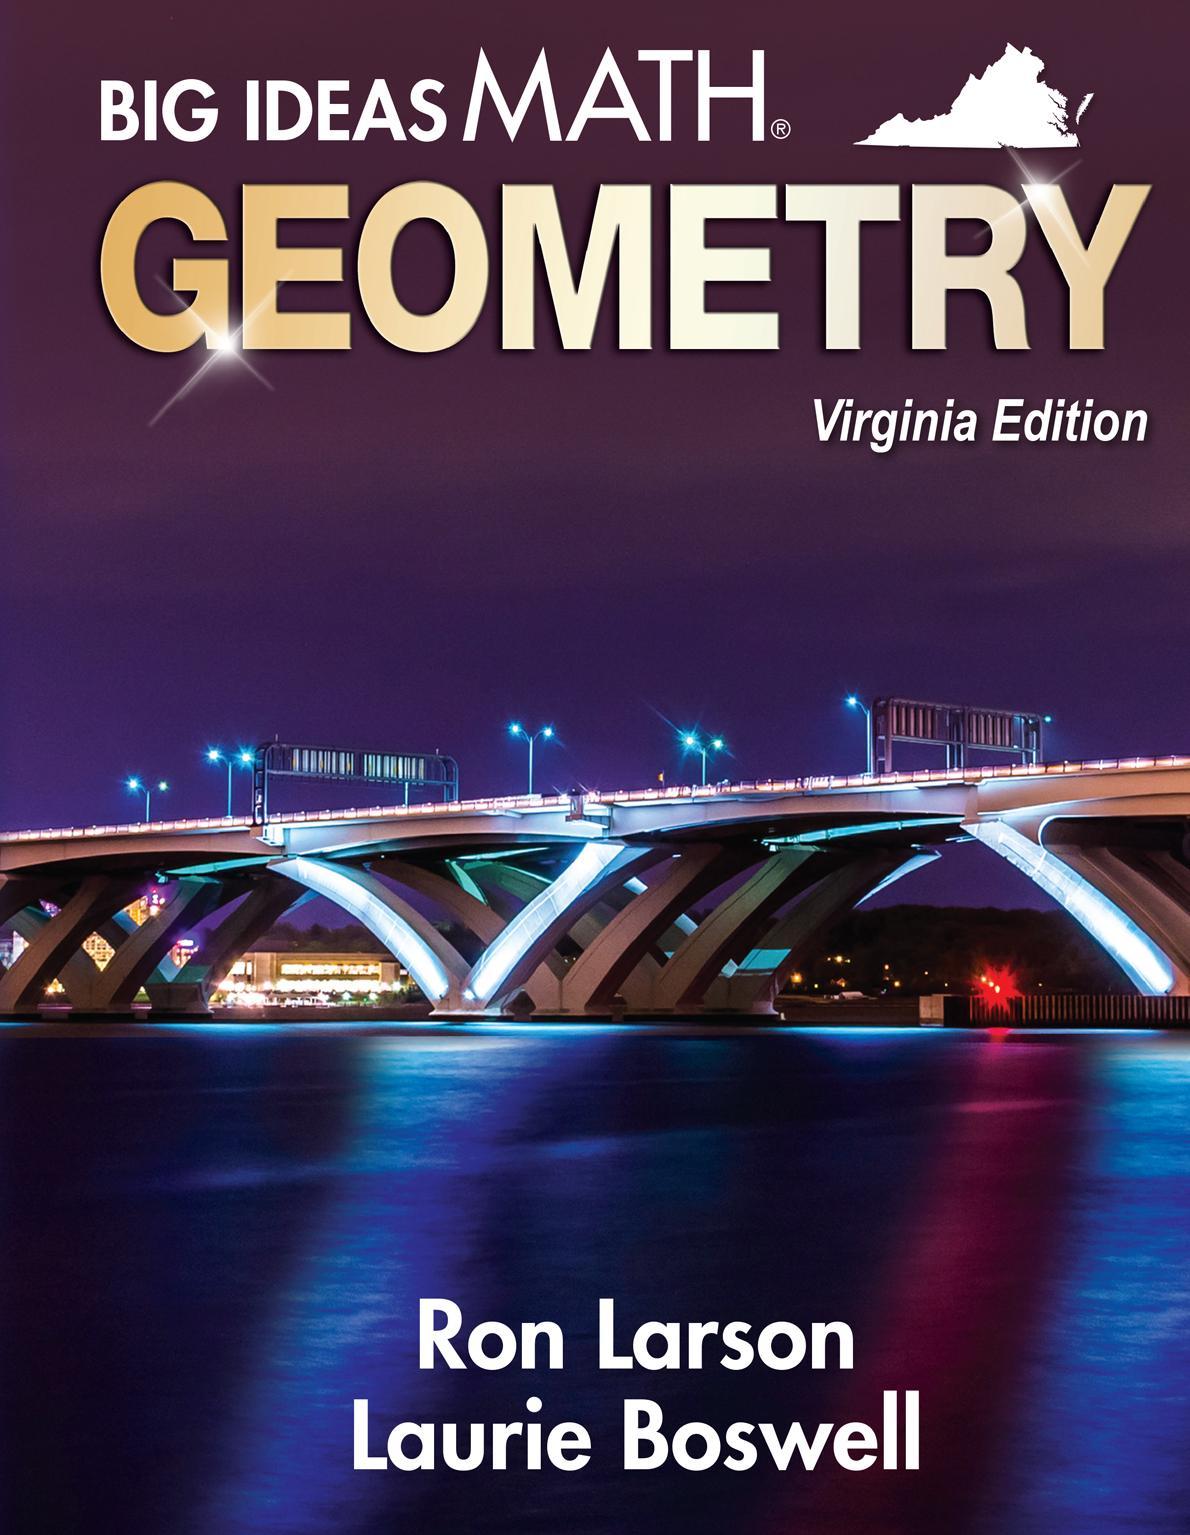 big ideas math, geometry, virginia edition 1st edition ron larson, laurie boswell 1635981328, 978-1635981322